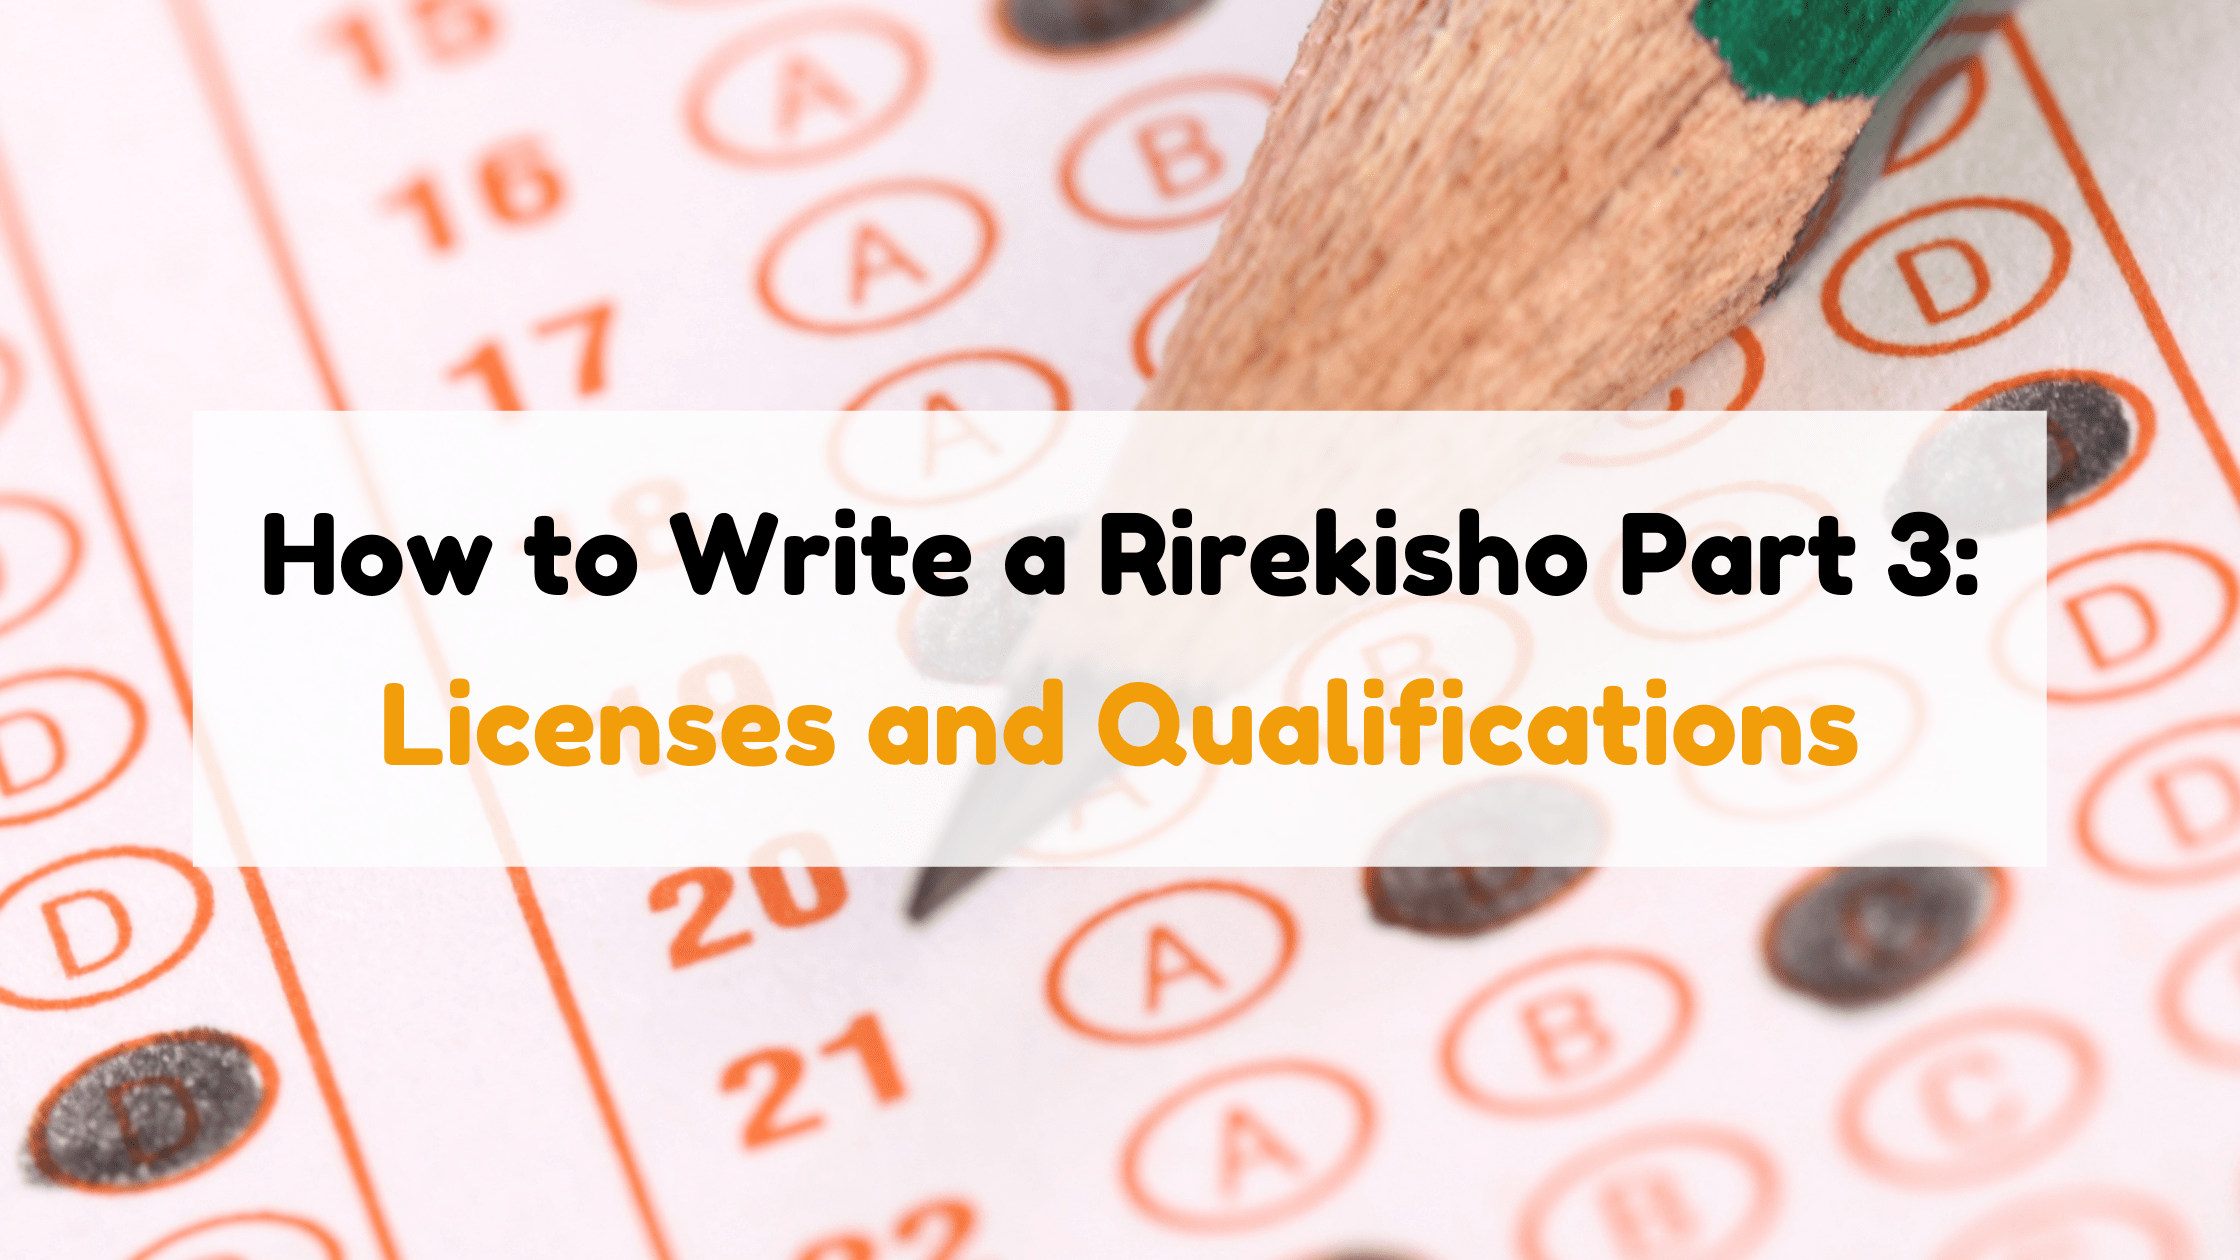 How to Write a Japanese Resume